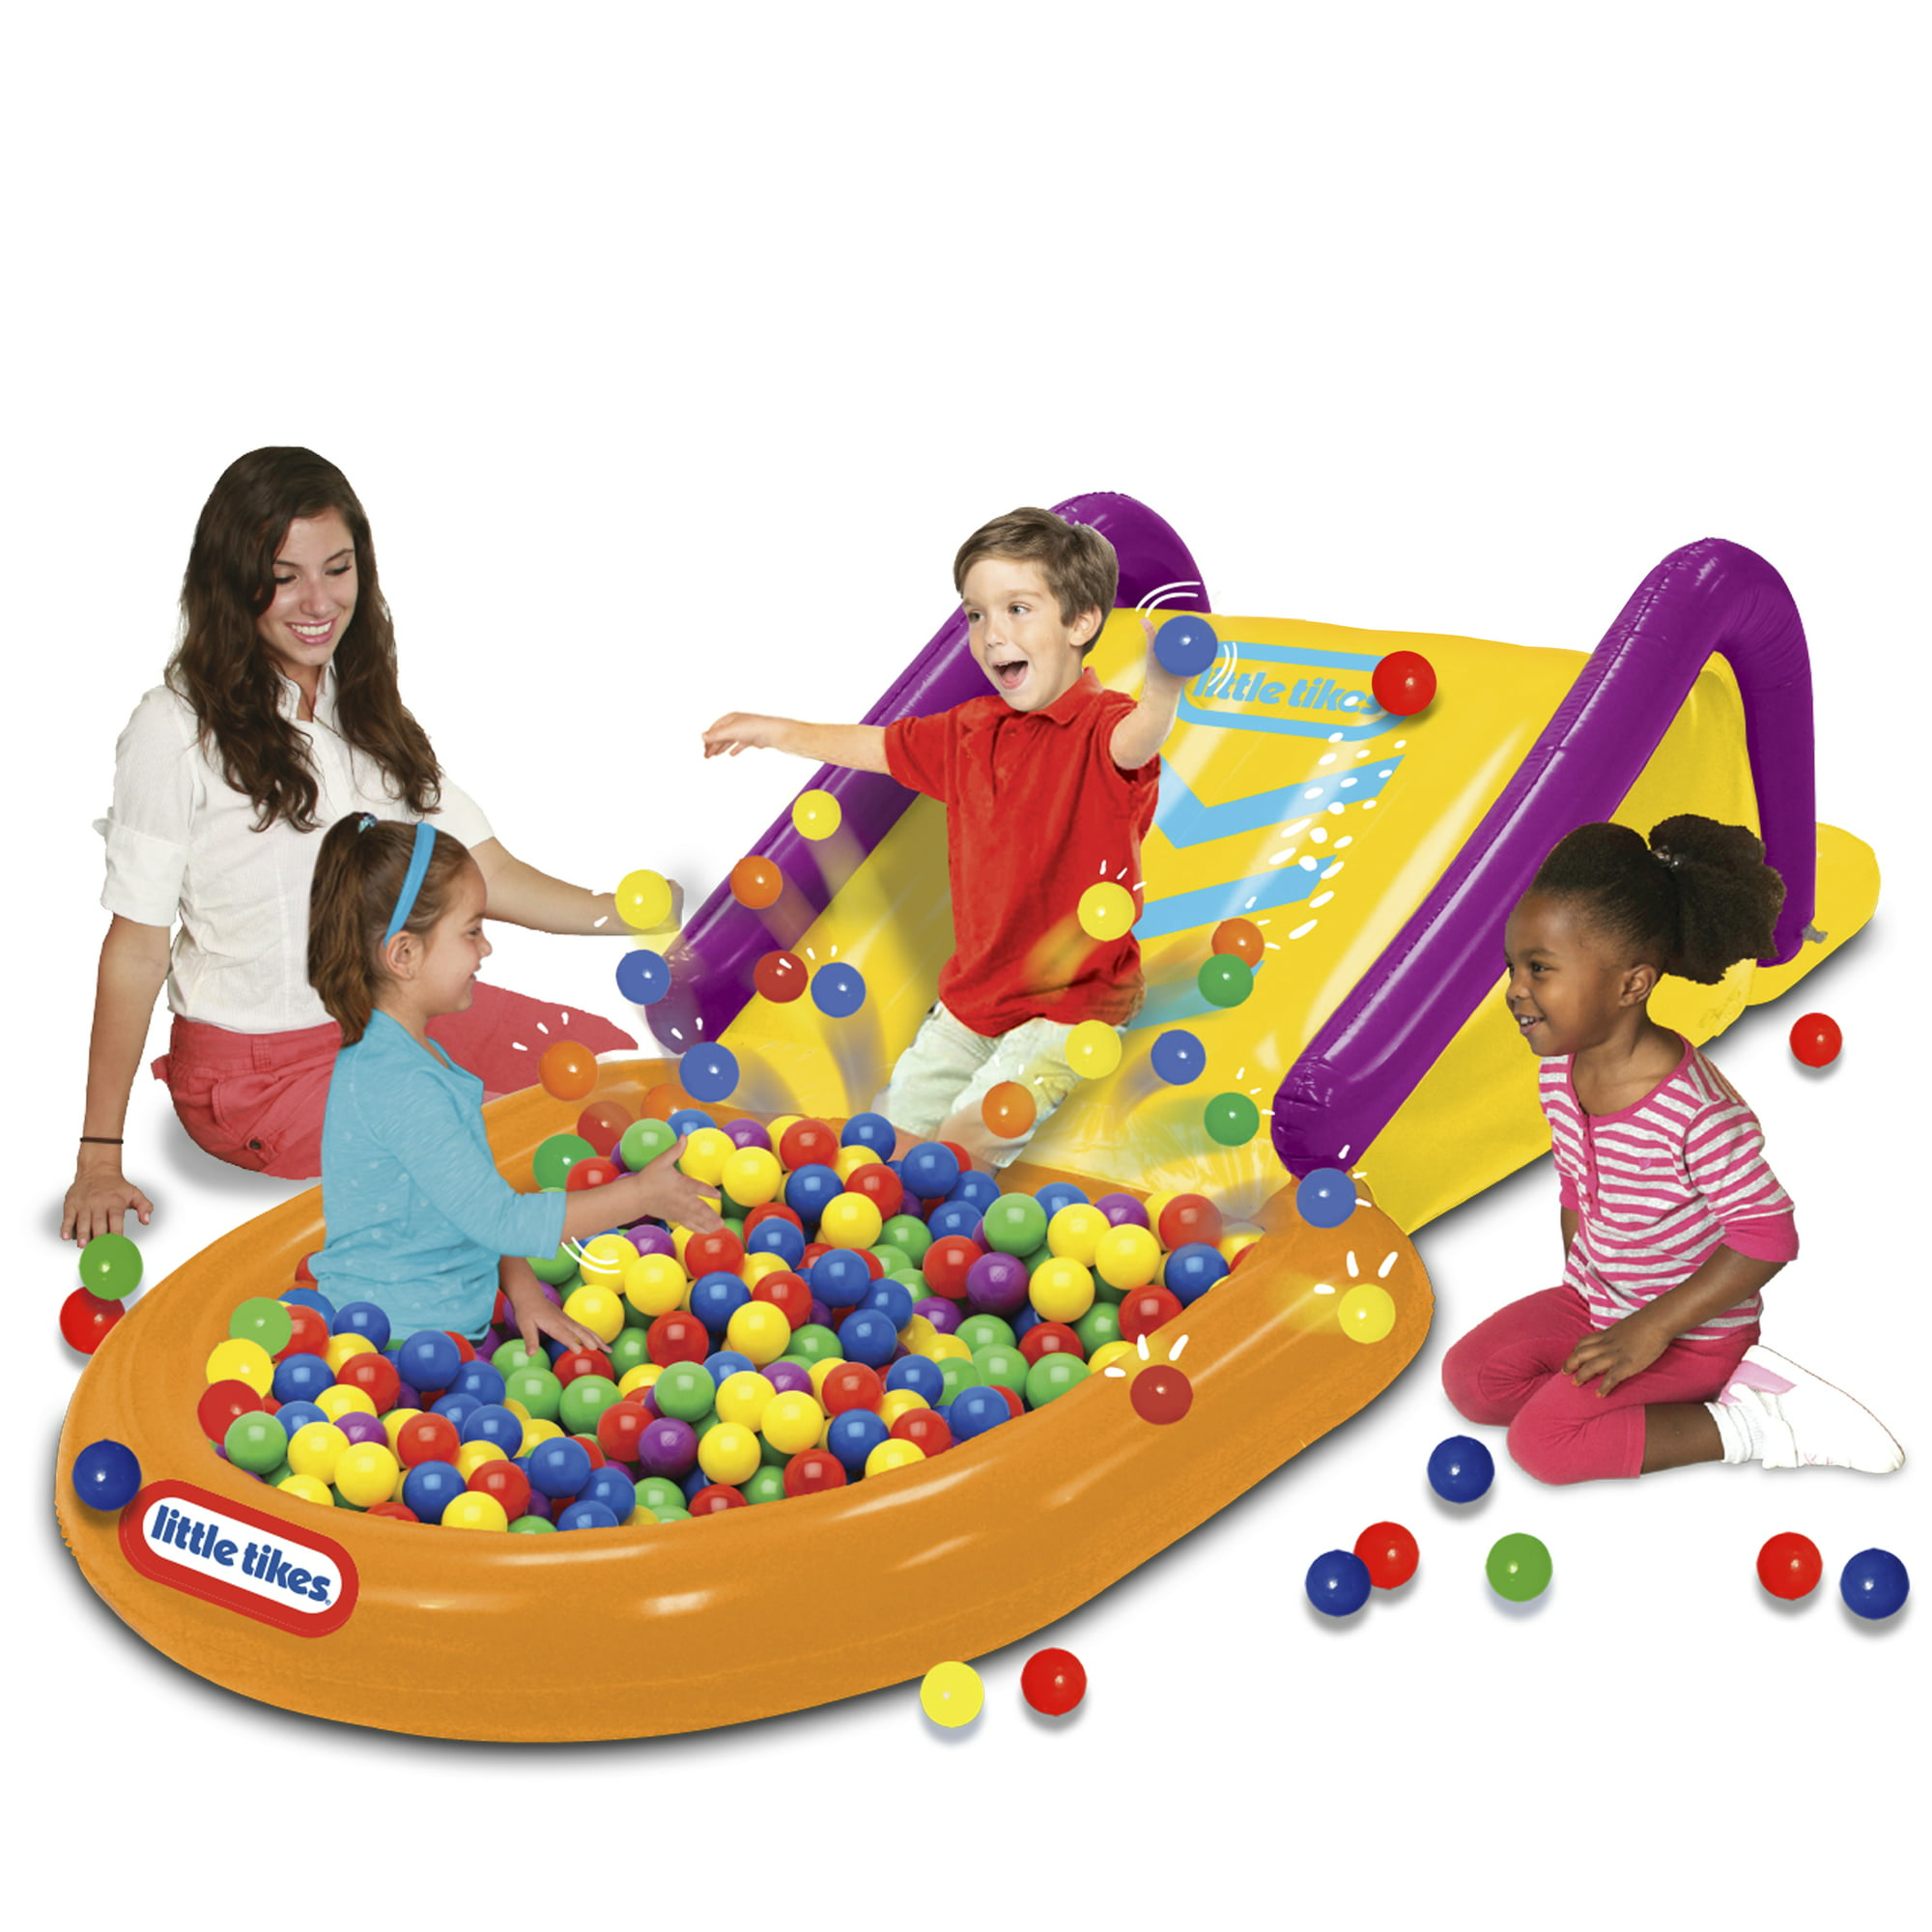 Little Tikes Slide and Splash Ball Pit, Inflatable Slide (42 in) and Ball Pit with 40 Balls for Kids Ages 3-6